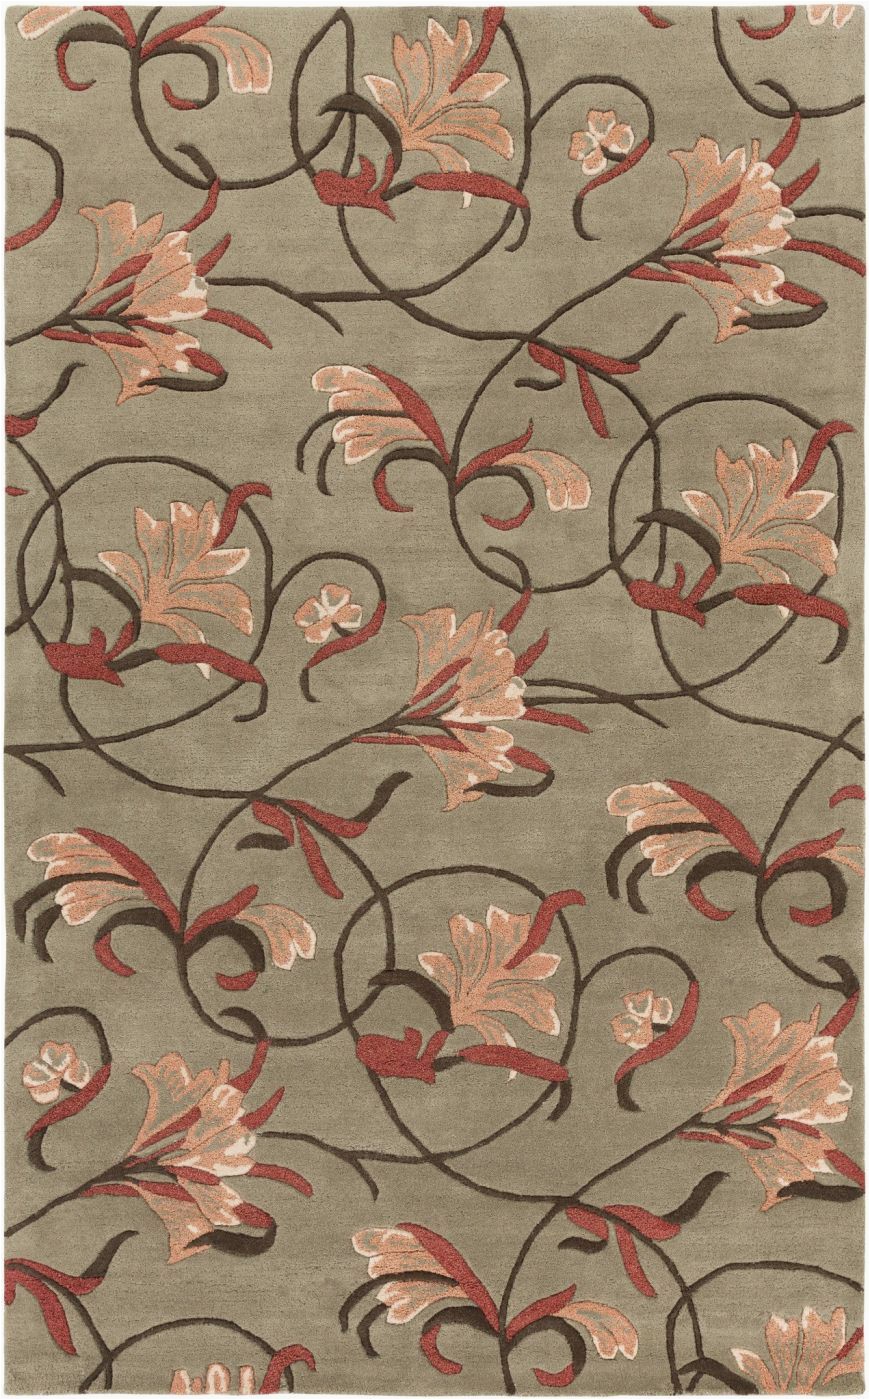 Maples Paisley Floral area Rug Surya Blowout Sale Up to Off G5153 268 Goa Floral and Paisley area Rug Neutral orange Only Ly $361 80 at Contemporary Furniture Warehouse